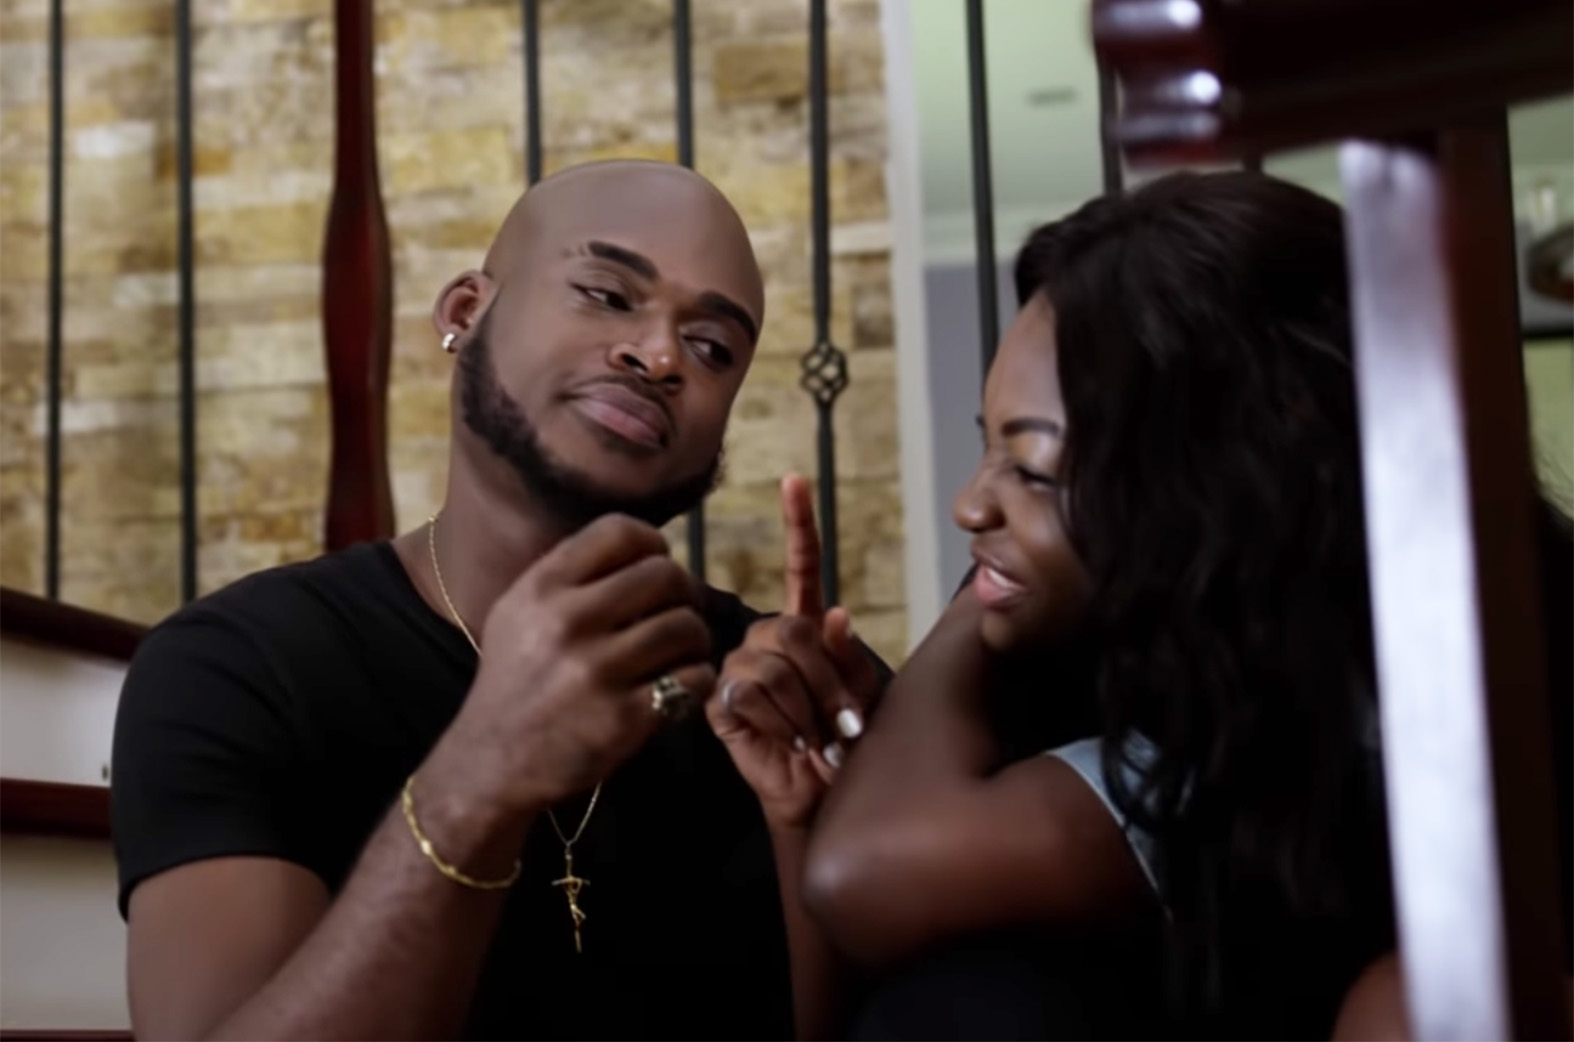 Video Premiere: Only You by Kobla Jnr feat. Efya